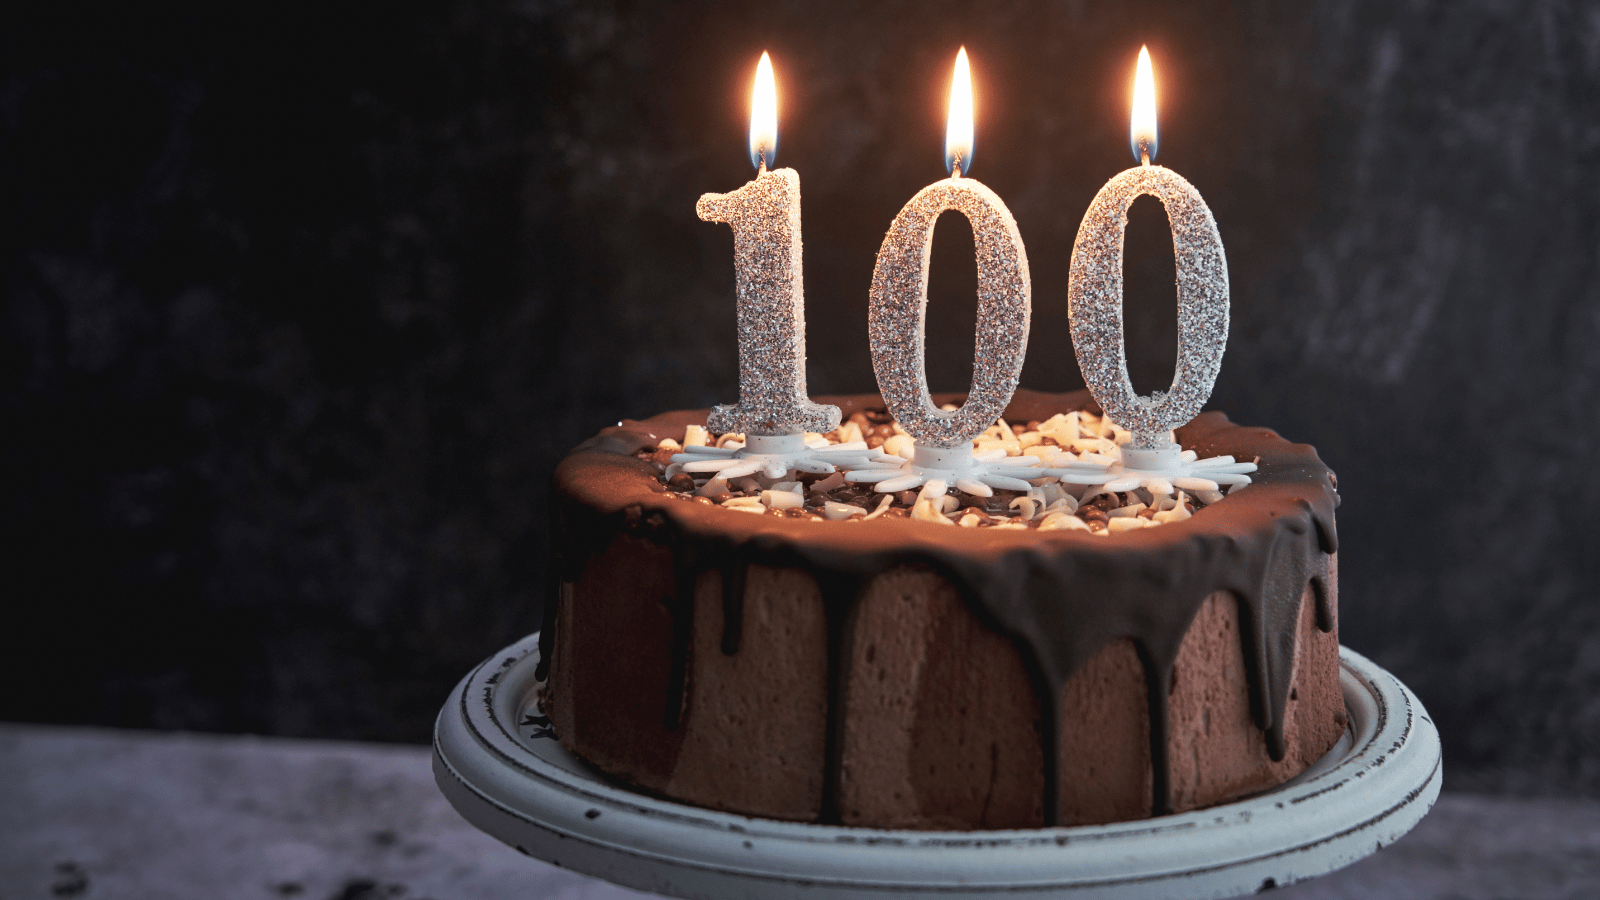 Chocolate frosted cake on cake stand with lit candles that say 100